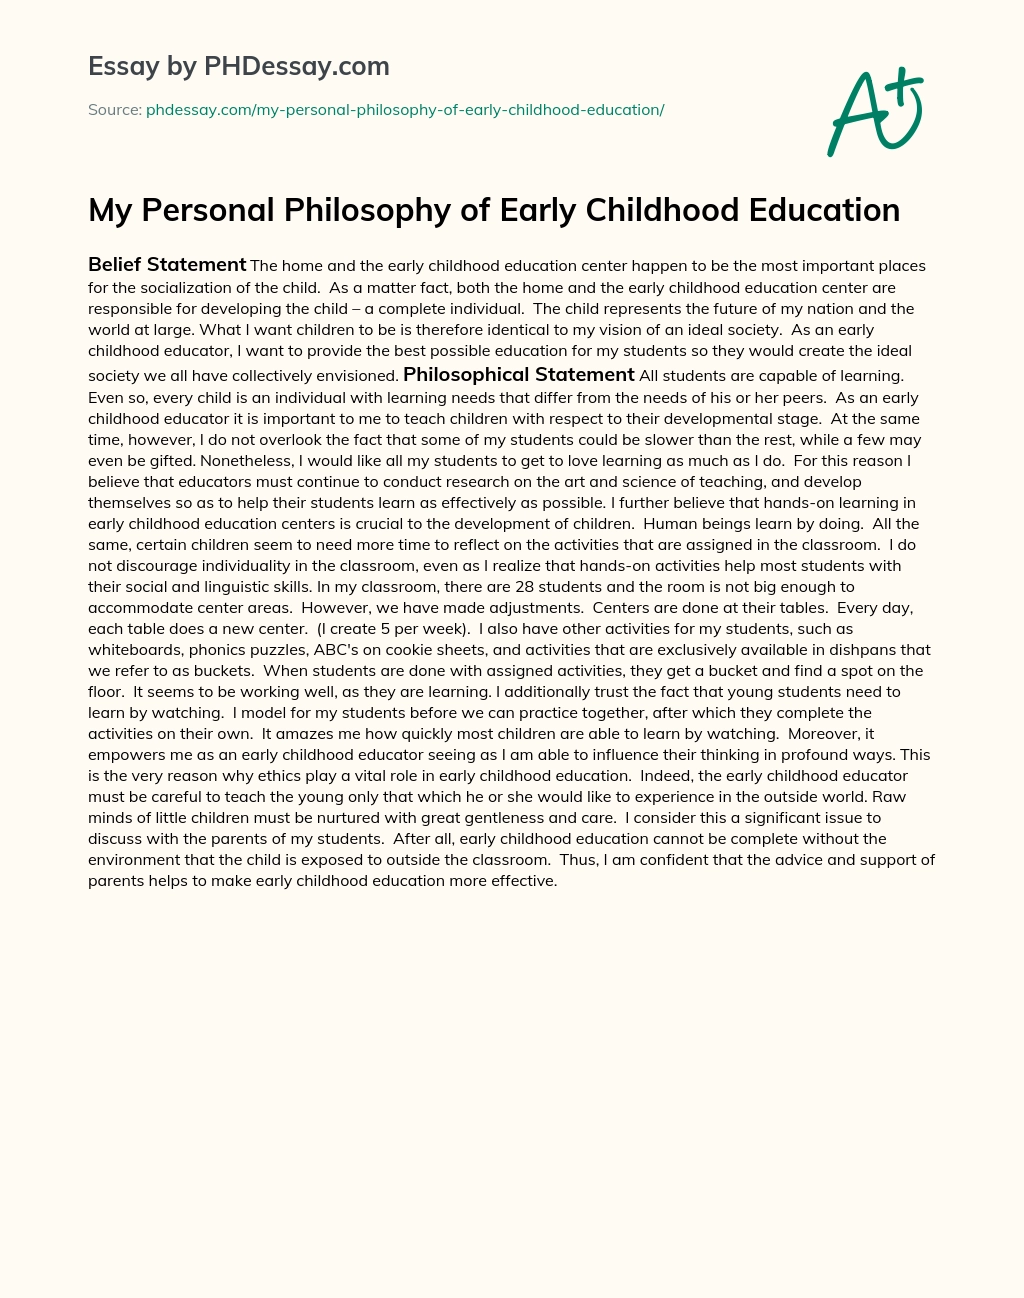 My Personal Philosophy of Early Childhood Education essay